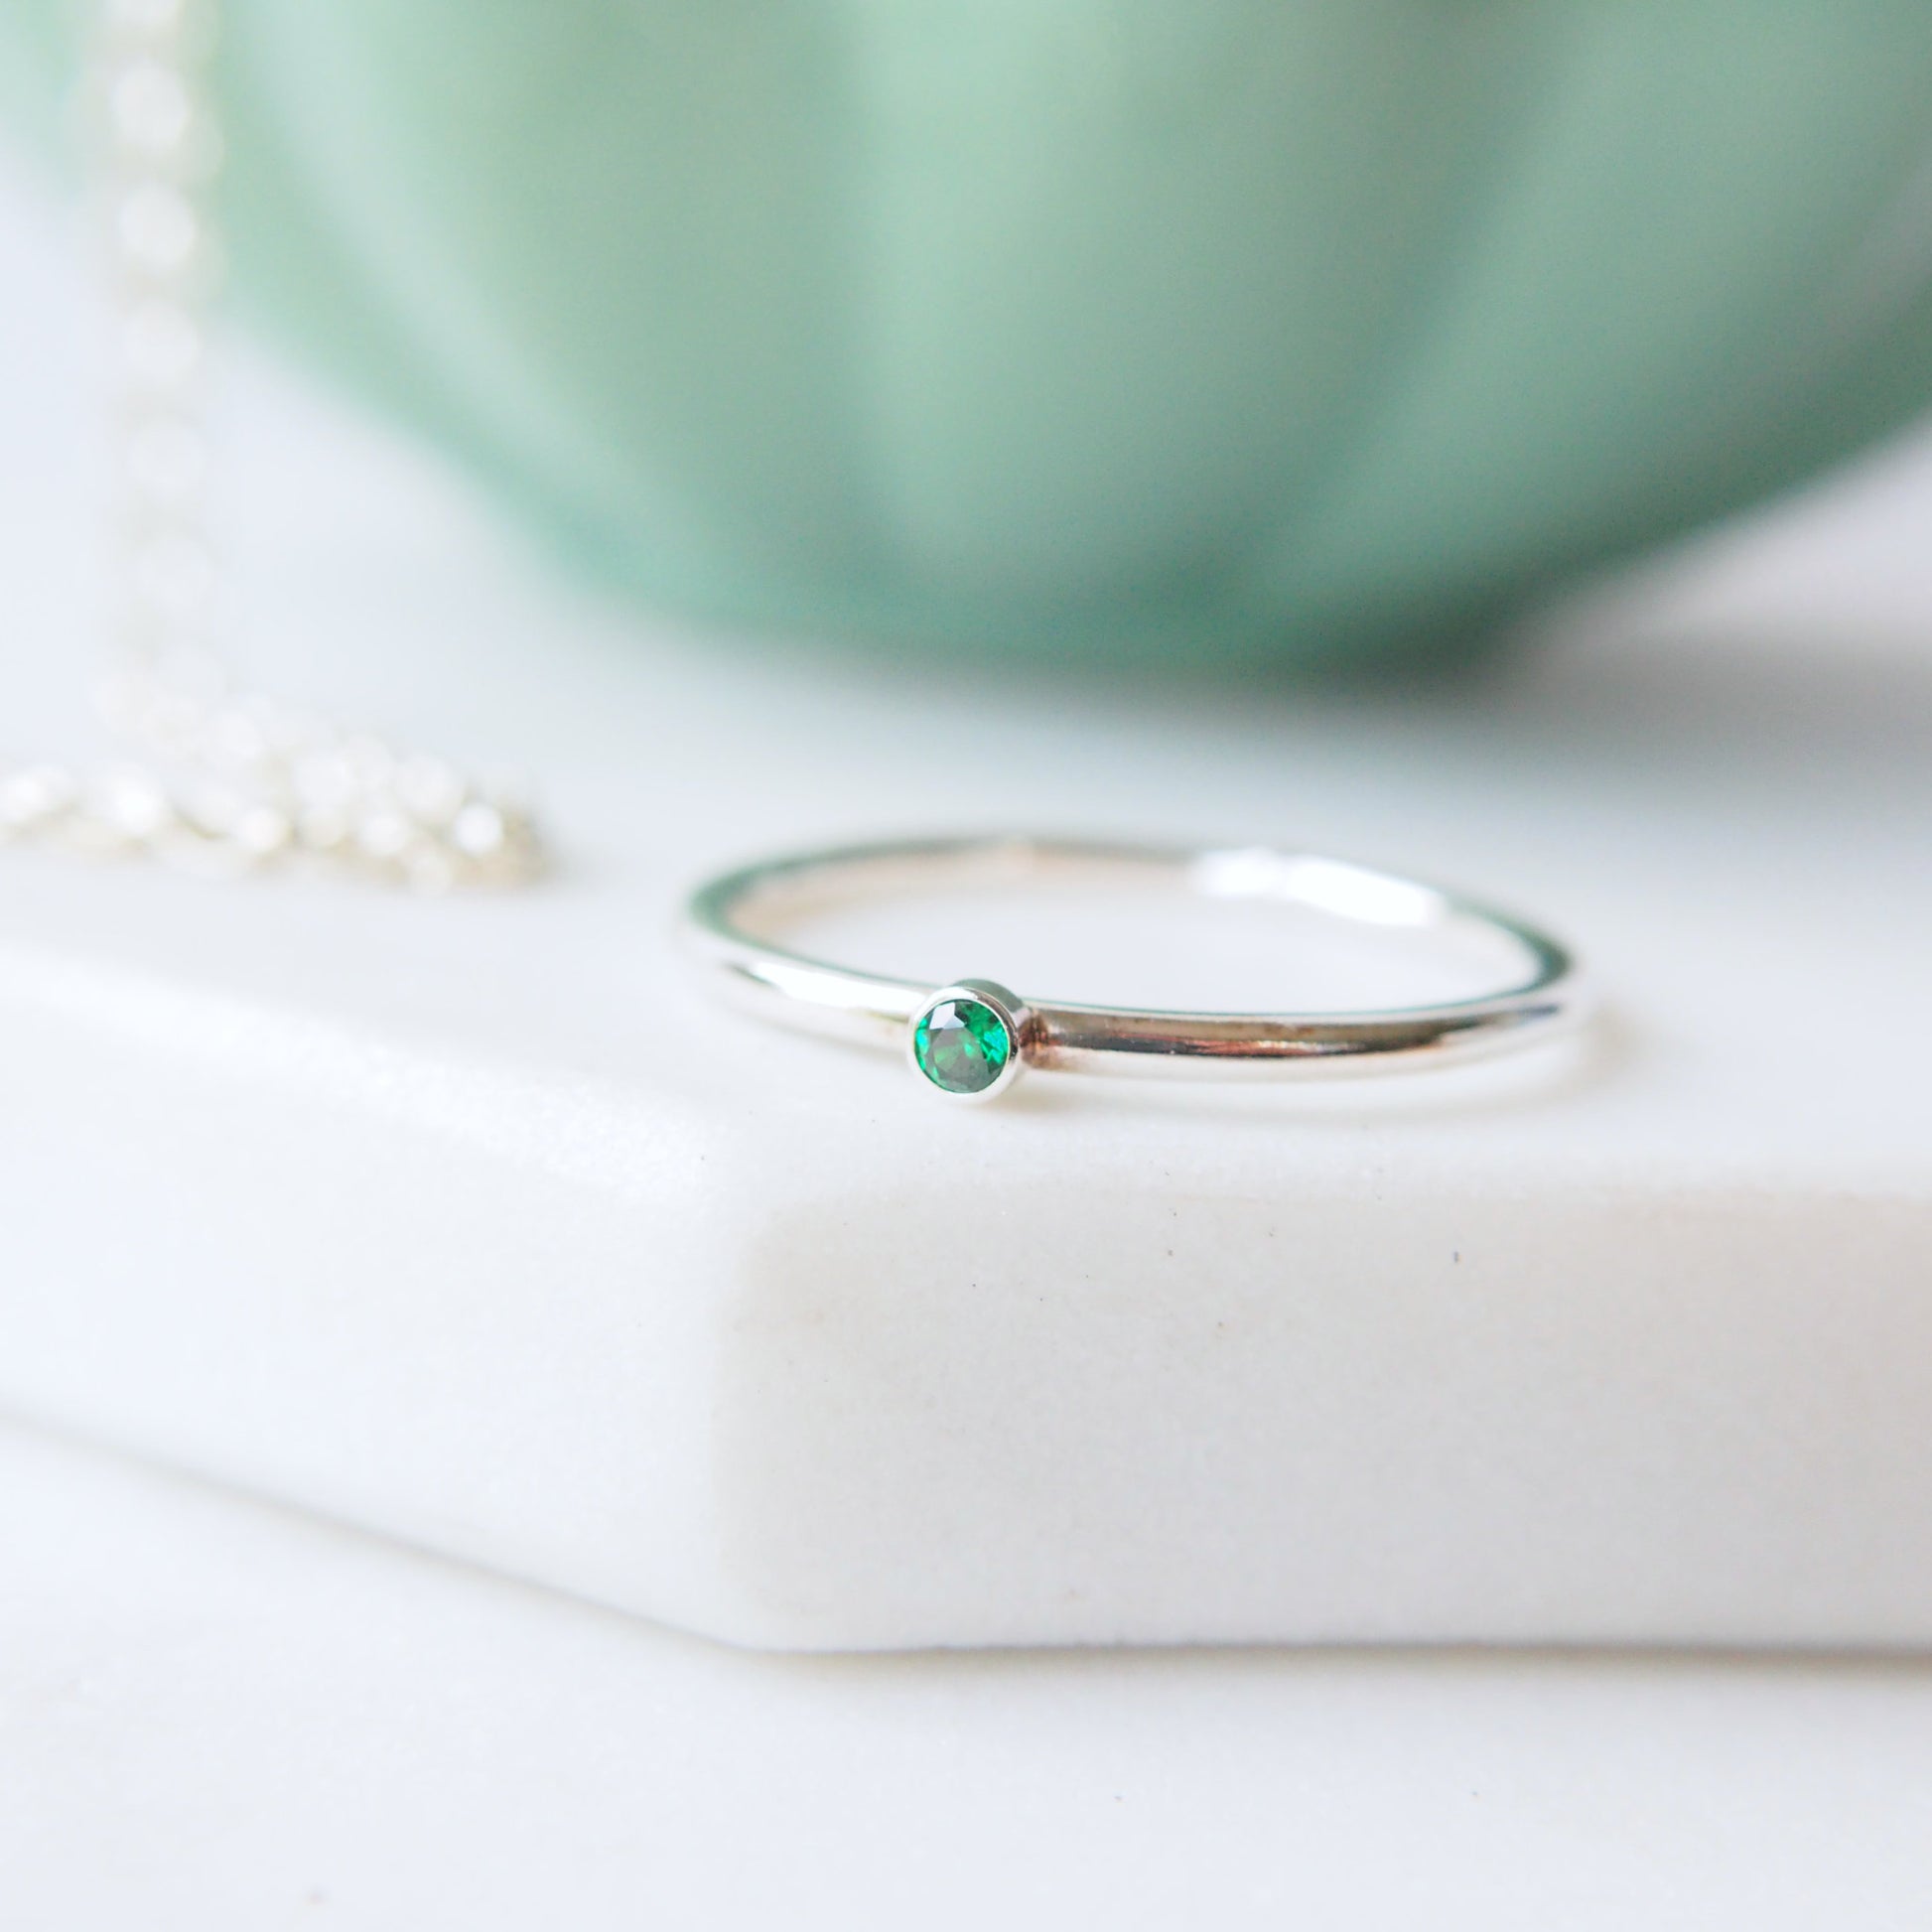 Round band silver ring with a very small 2mm emerald cubic zirconia. Handmade by maram jewellery. shown on a white marble slab with a green jewellery bowl in the background